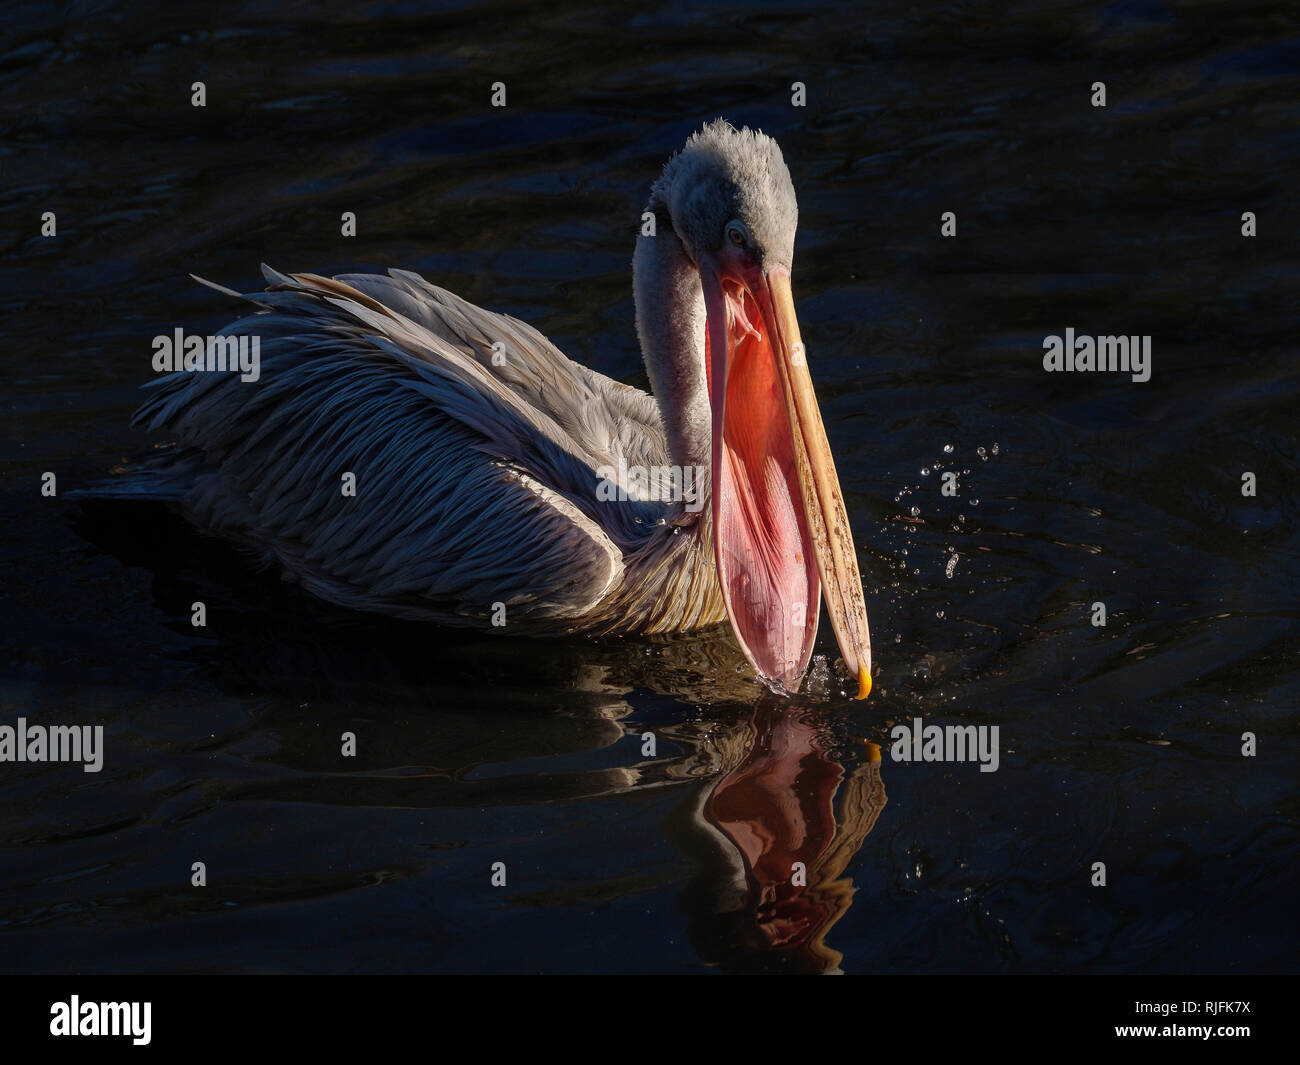 The Pelican has a very large beak pouch which it uses to catch and hold fish. Stock Photo